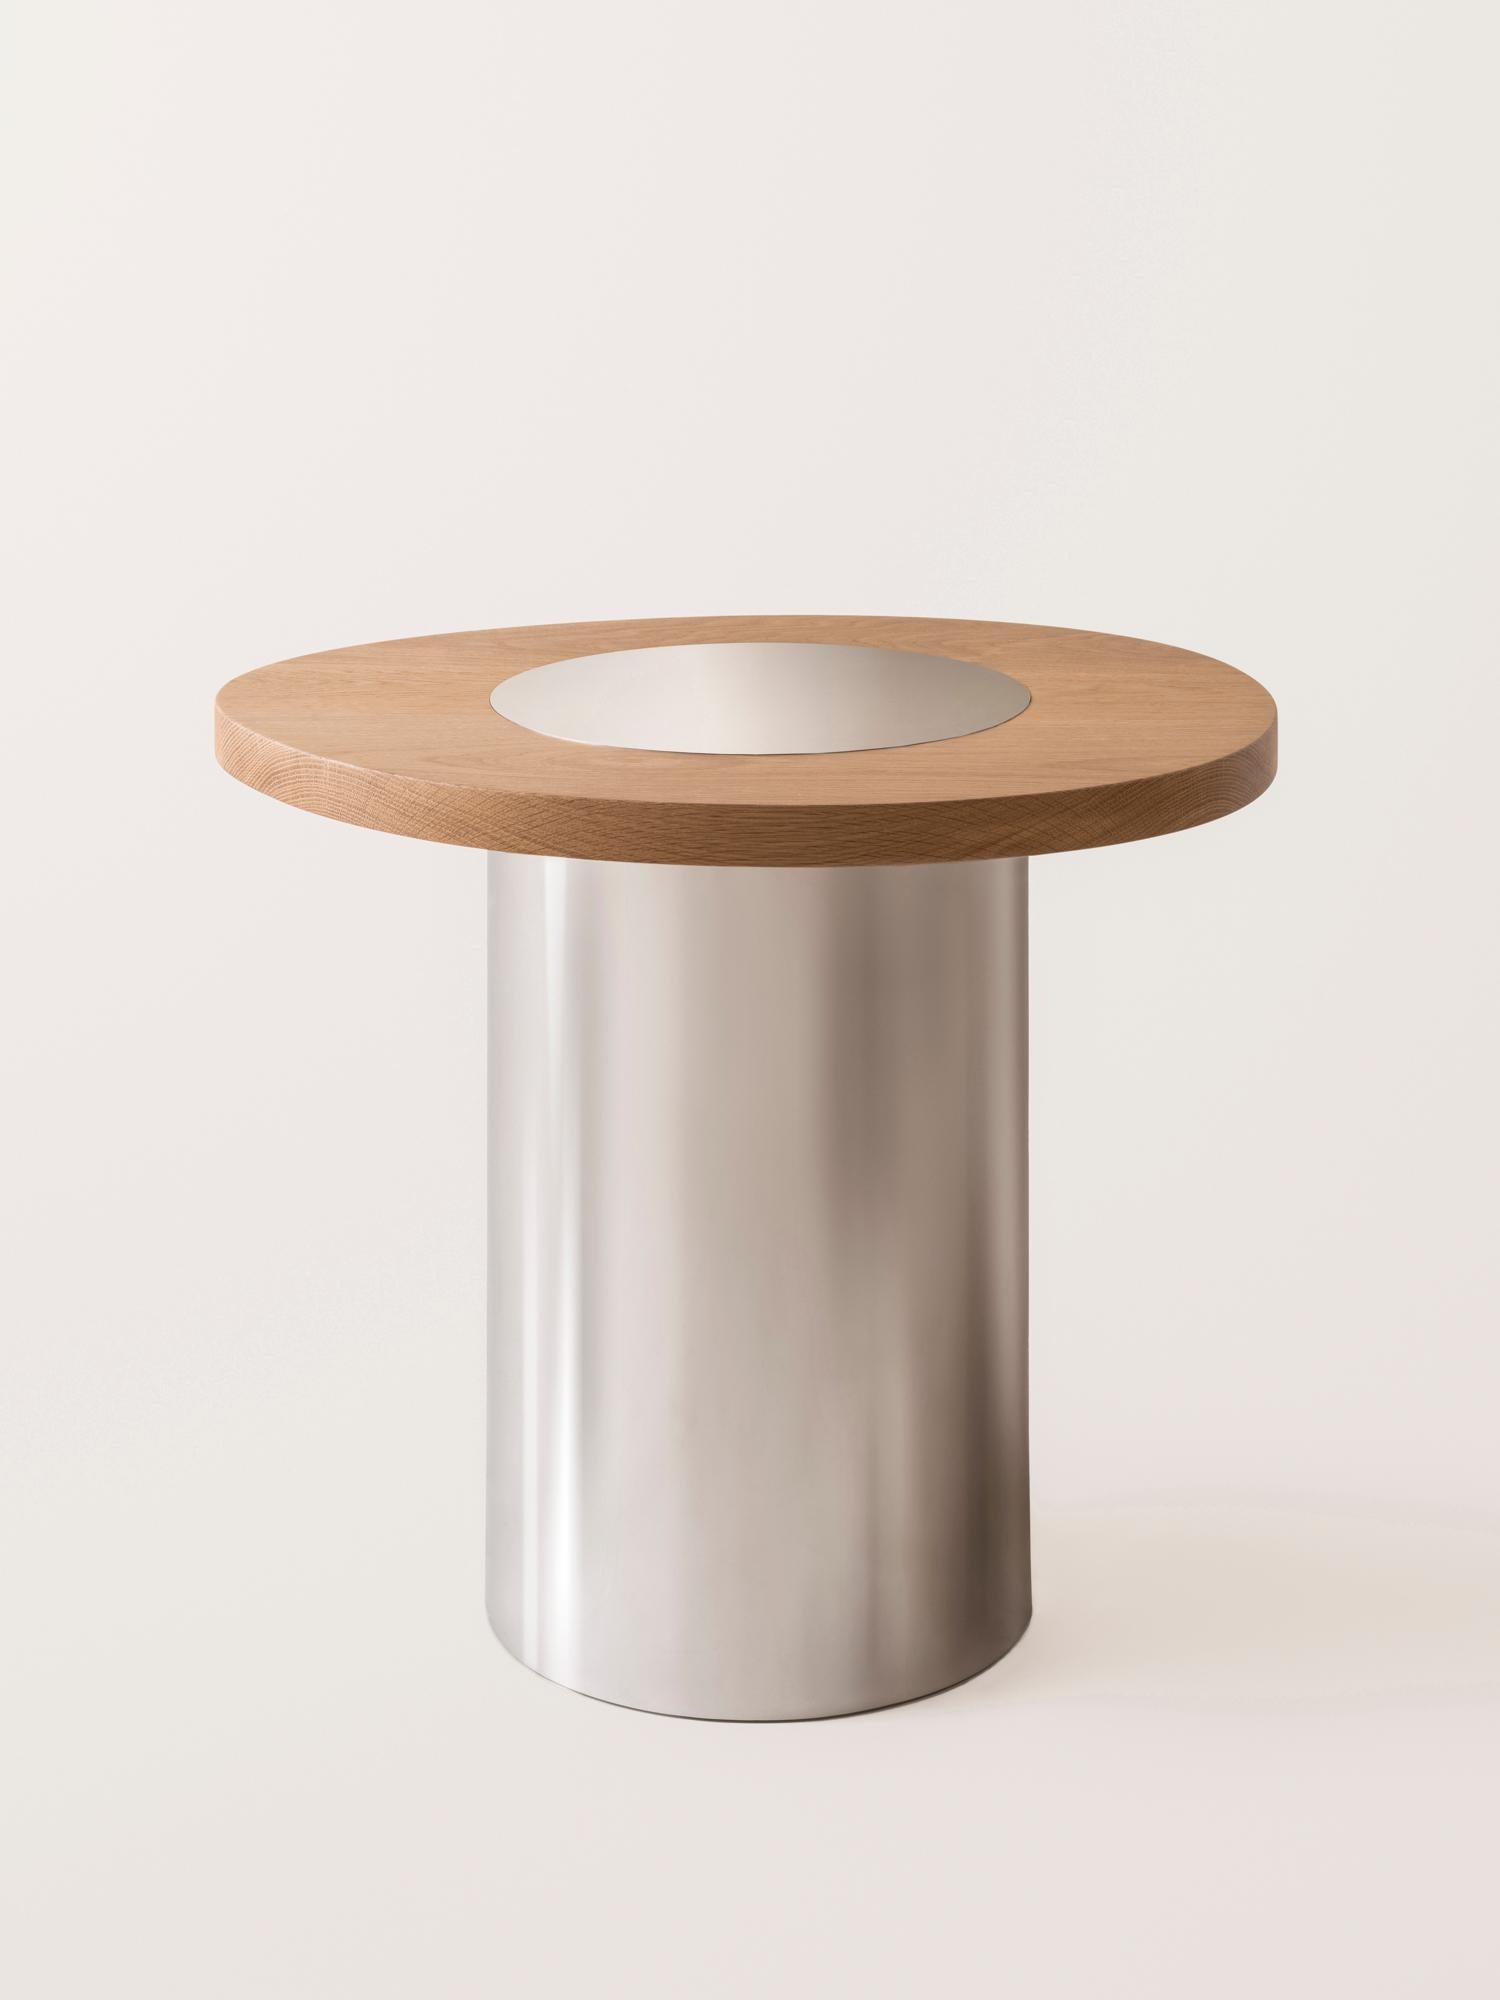 Silo Side Table Large - Oak and Polished Stainless Steel In New Condition For Sale In New York, NY